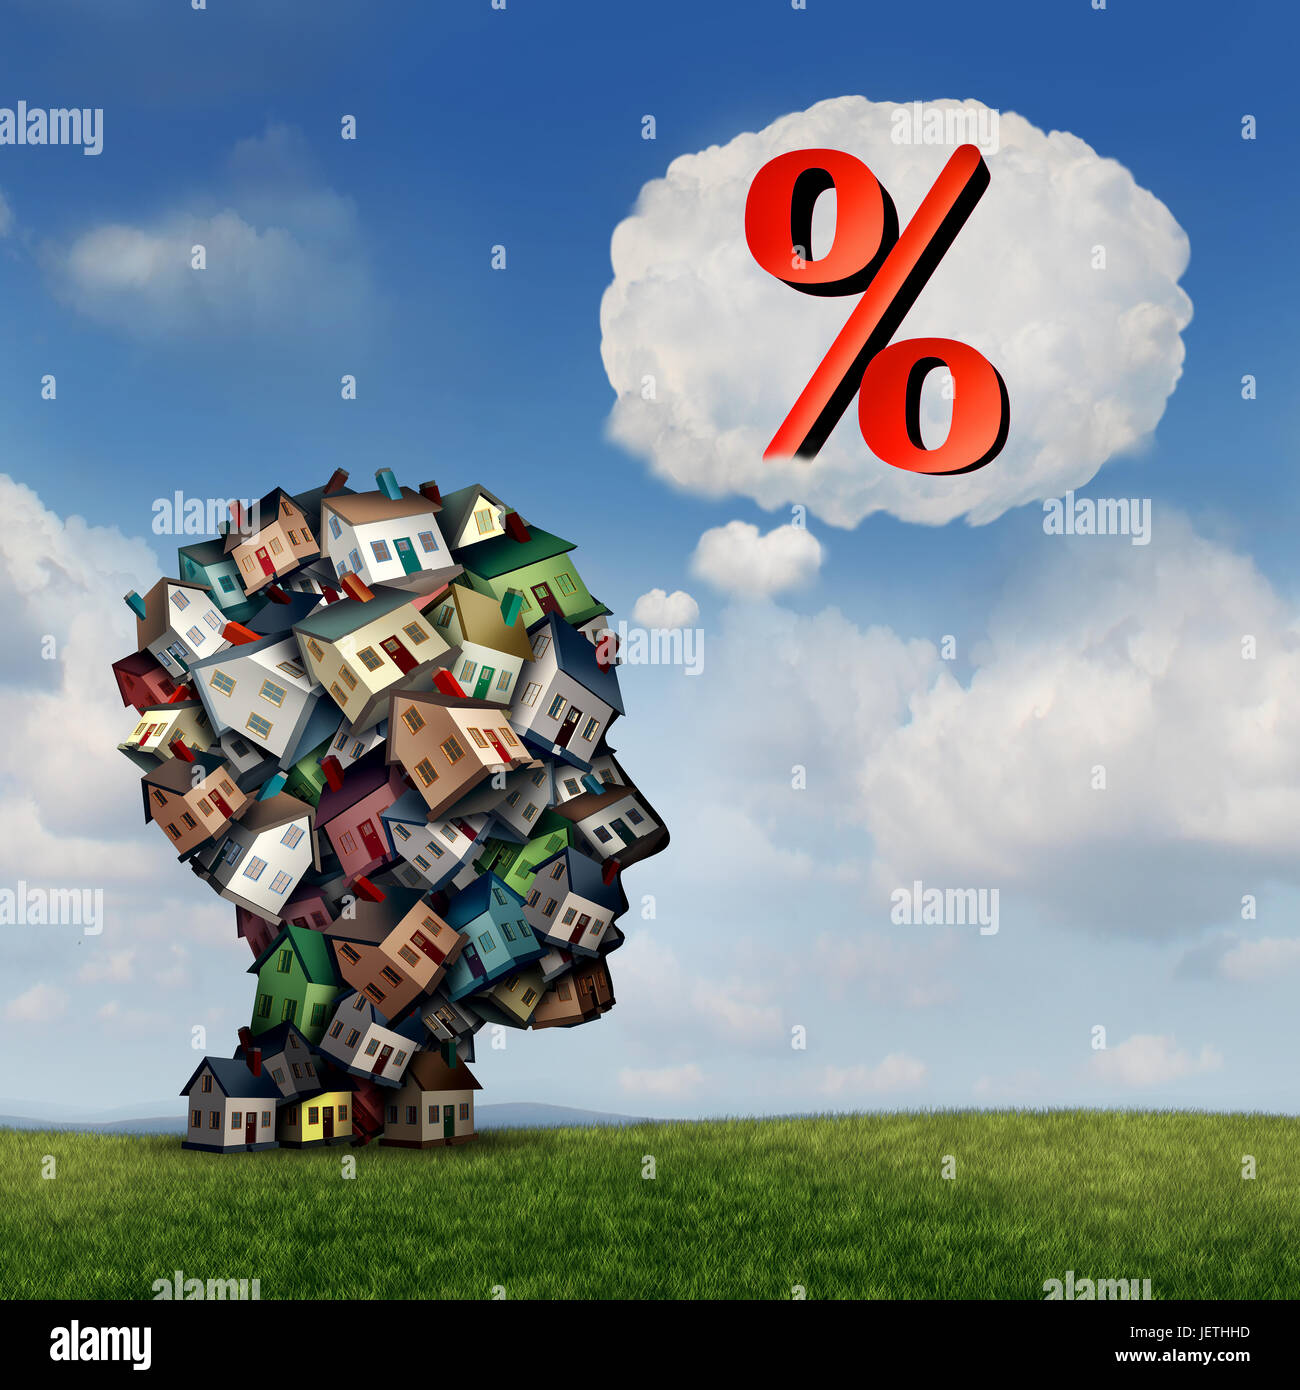 Mortgage rate plan and planning for home lending interest percentage rates as a group of houses shaped as a human head with a percent. Stock Photo